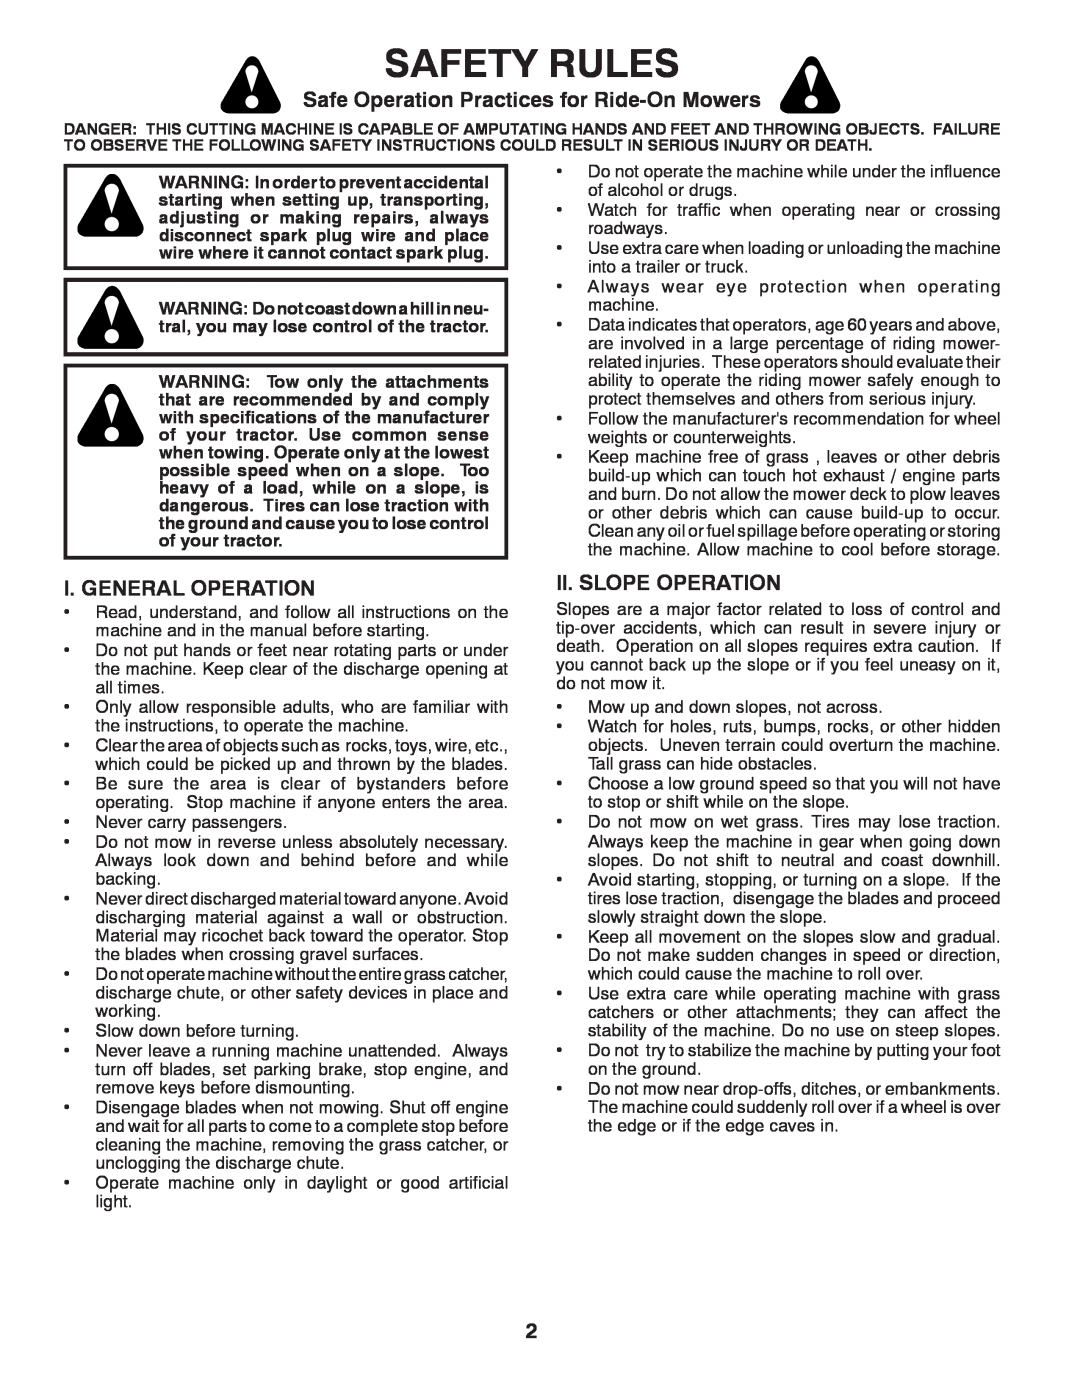 McCulloch 96041017700 Safety Rules, Safe Operation Practices for Ride-On Mowers, I. General Operation, Ii. Slope Operation 